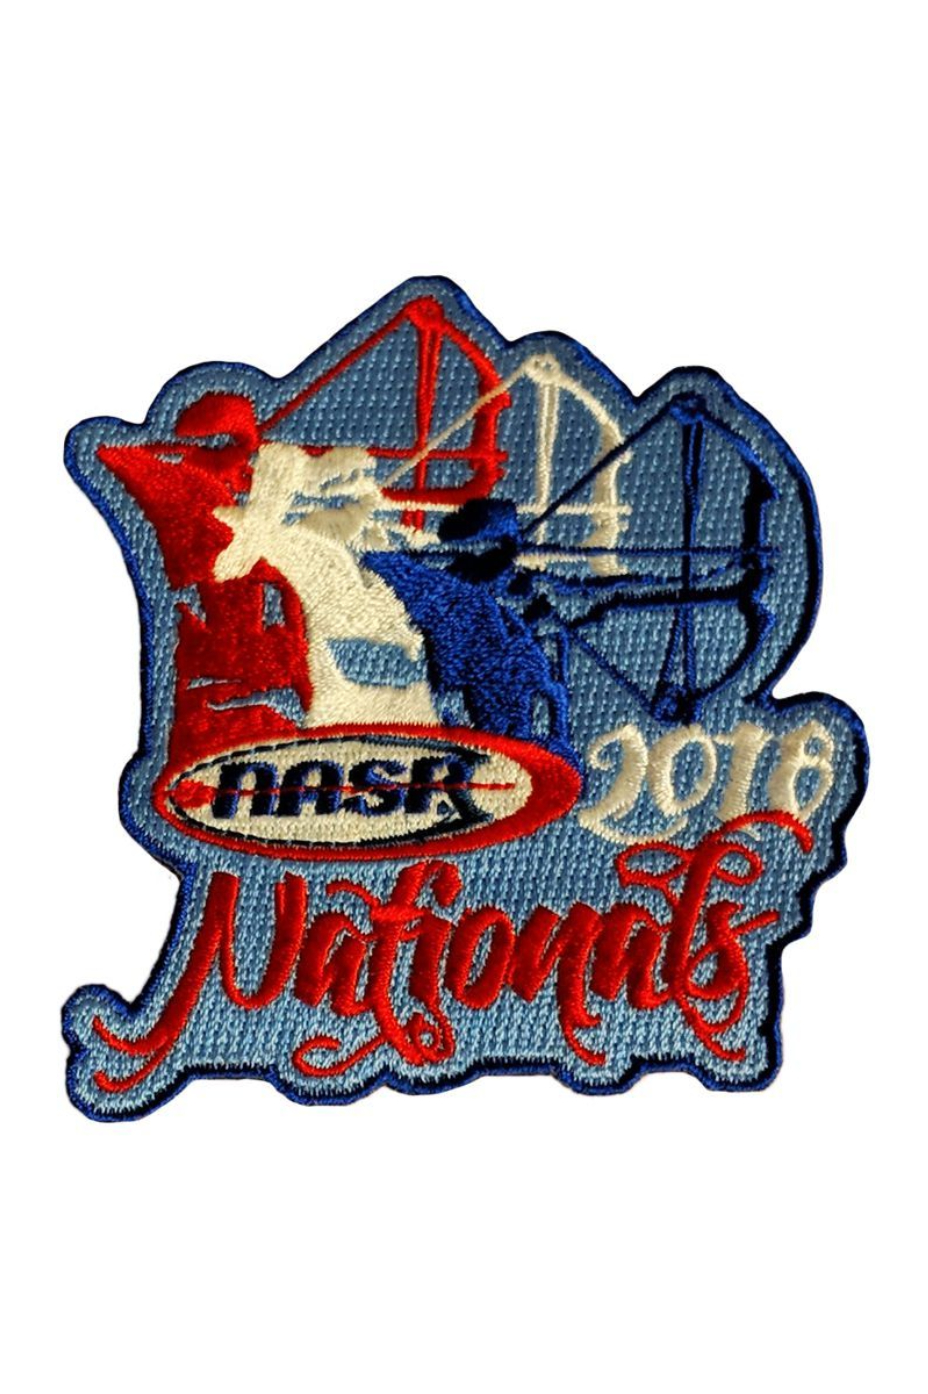 NASP® 2018 Nationals Patch